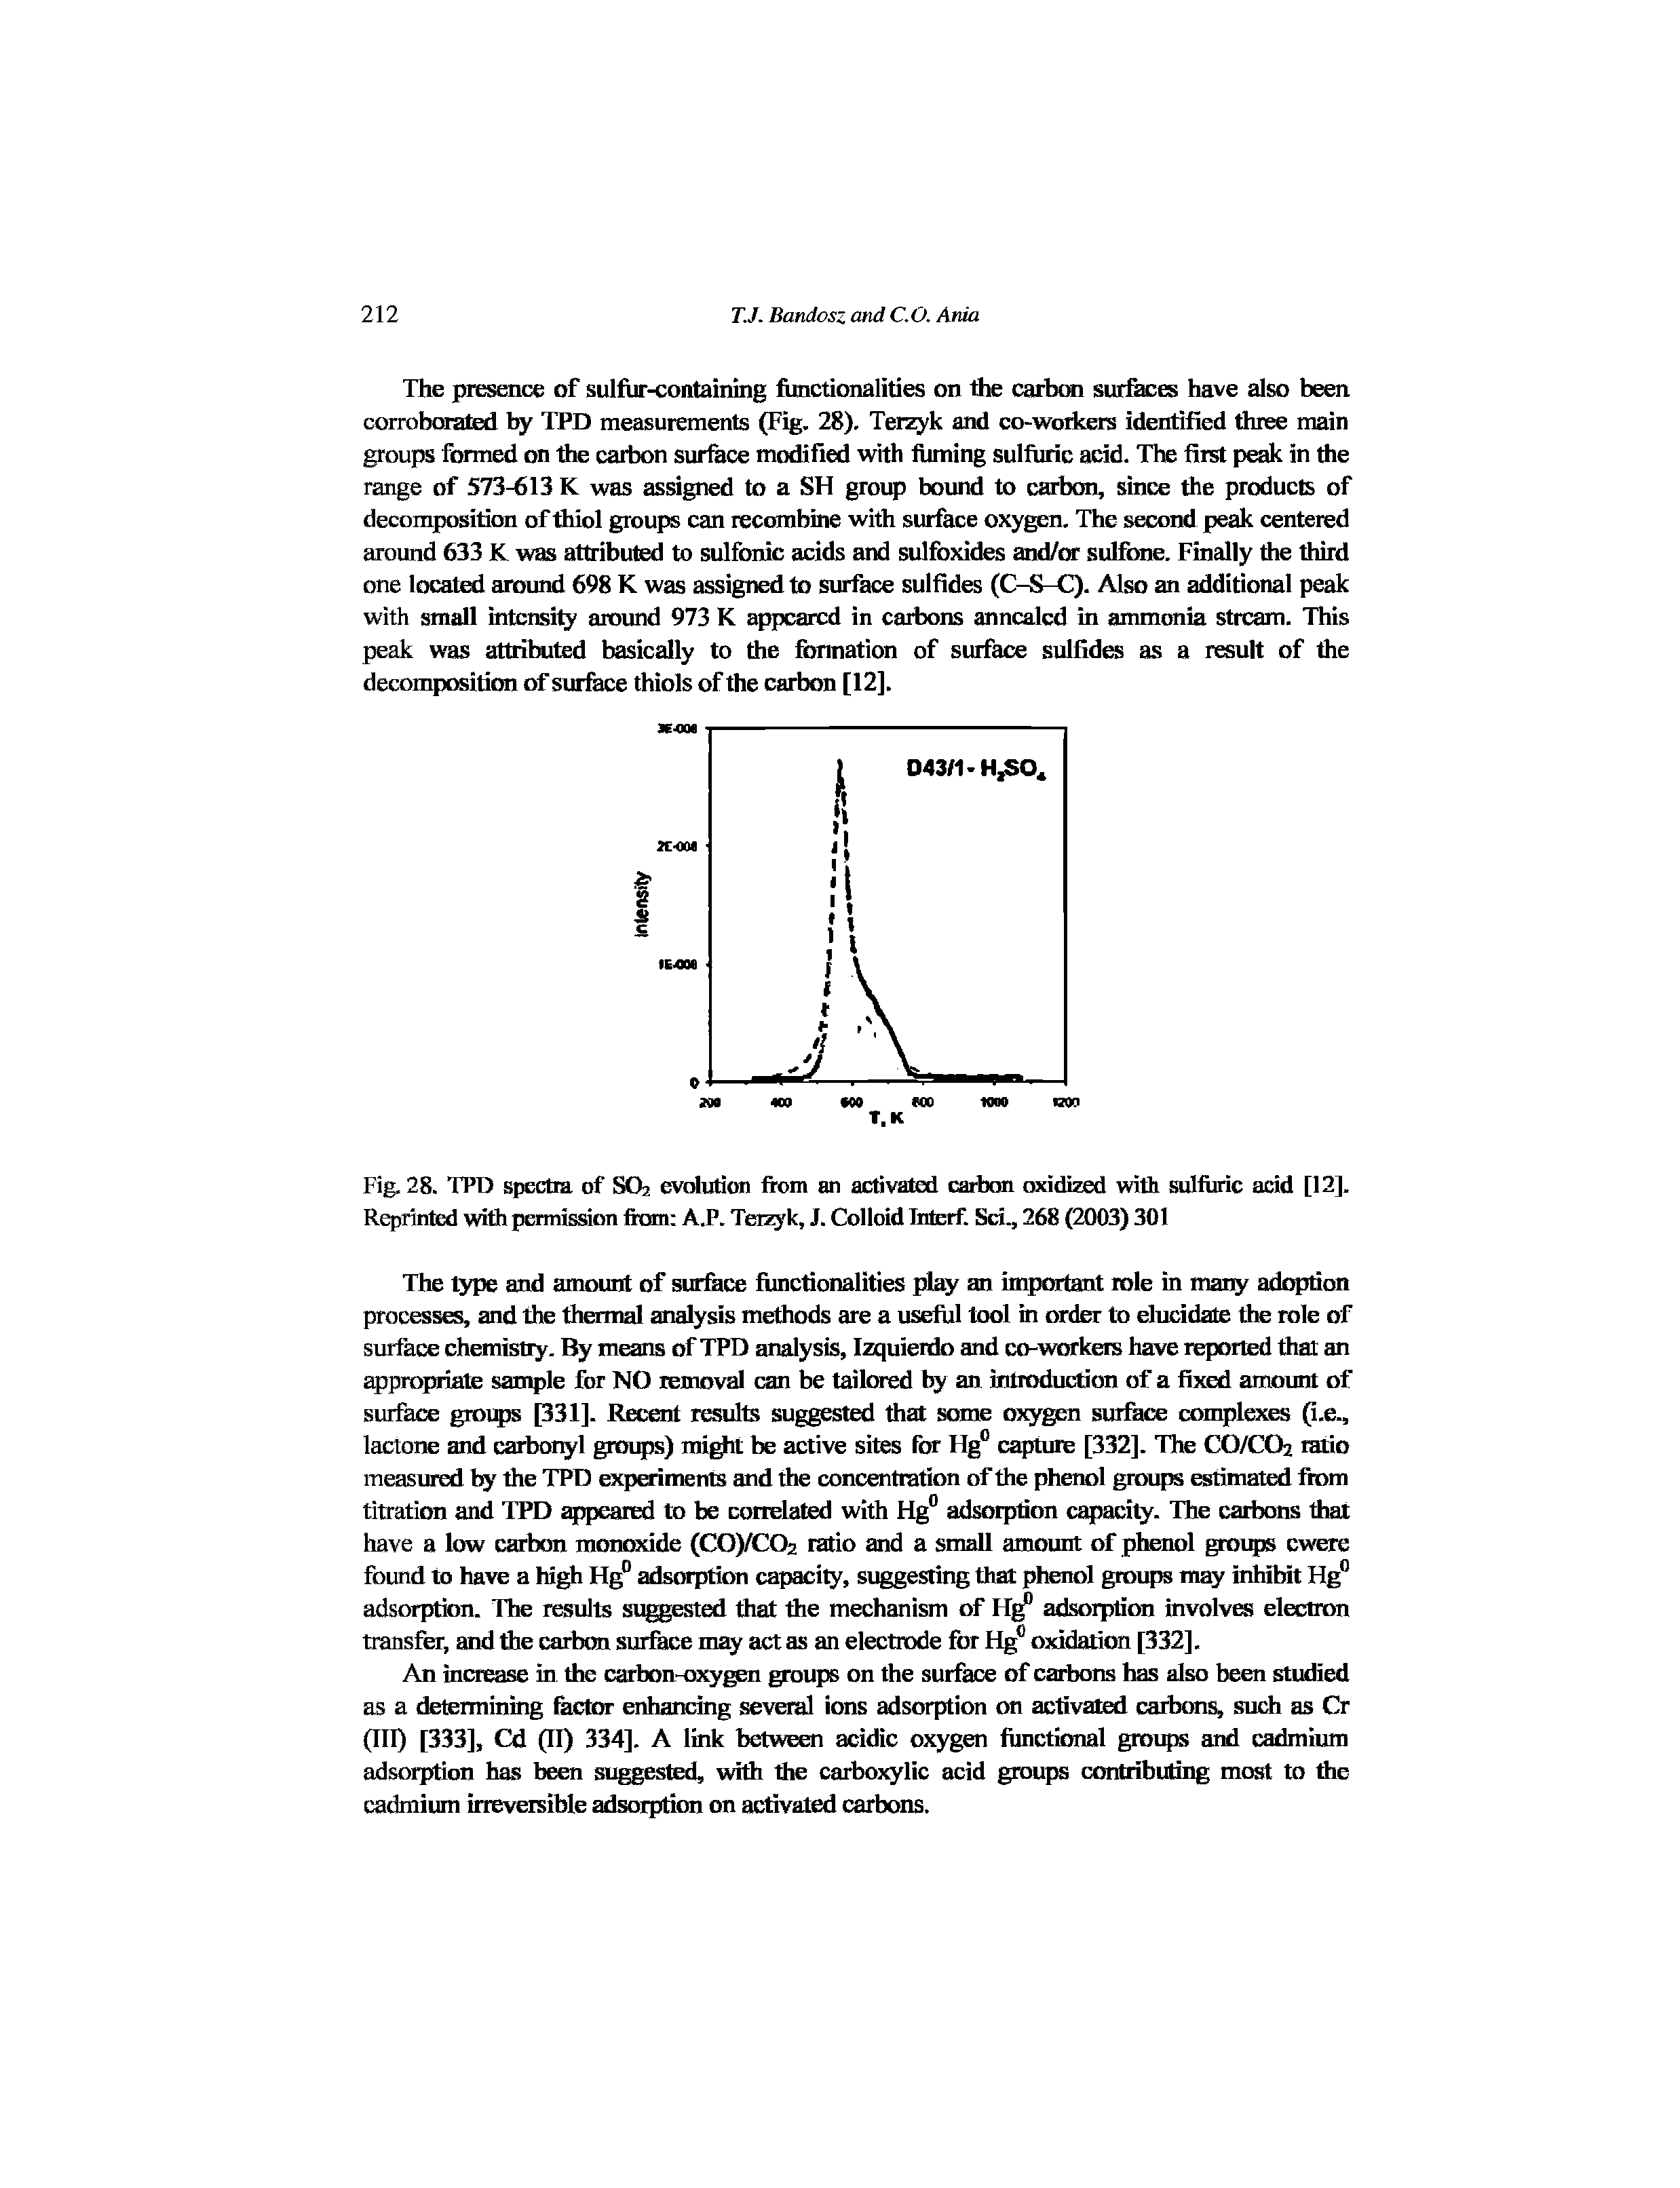 Fig. 28. TPD speeba of SO2 evolution from an activated carbon oxidized with sulfuric acid [12]. Reprinted with permission fhan A.P. Tetzyk, J. Colloid Interf. Sci., 268 (2003) 301...